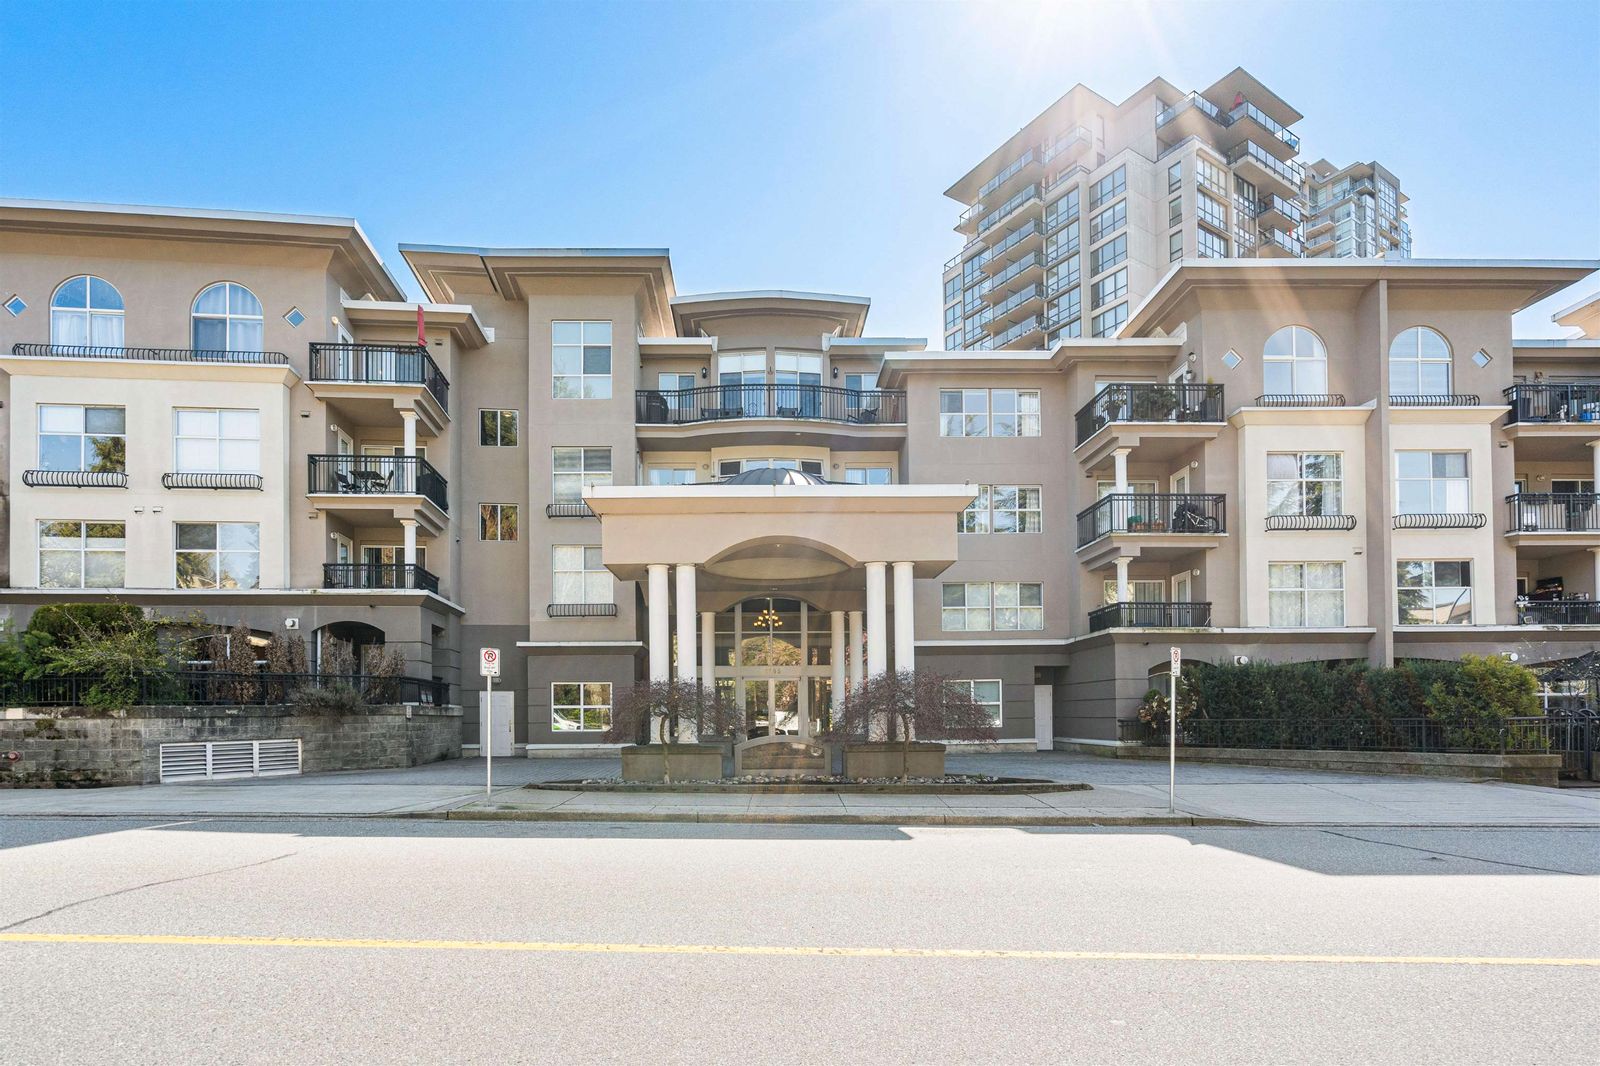 We have sold (bought) a property at 222 1185 1185 PACIFIC STREET ST in COQUITLAM